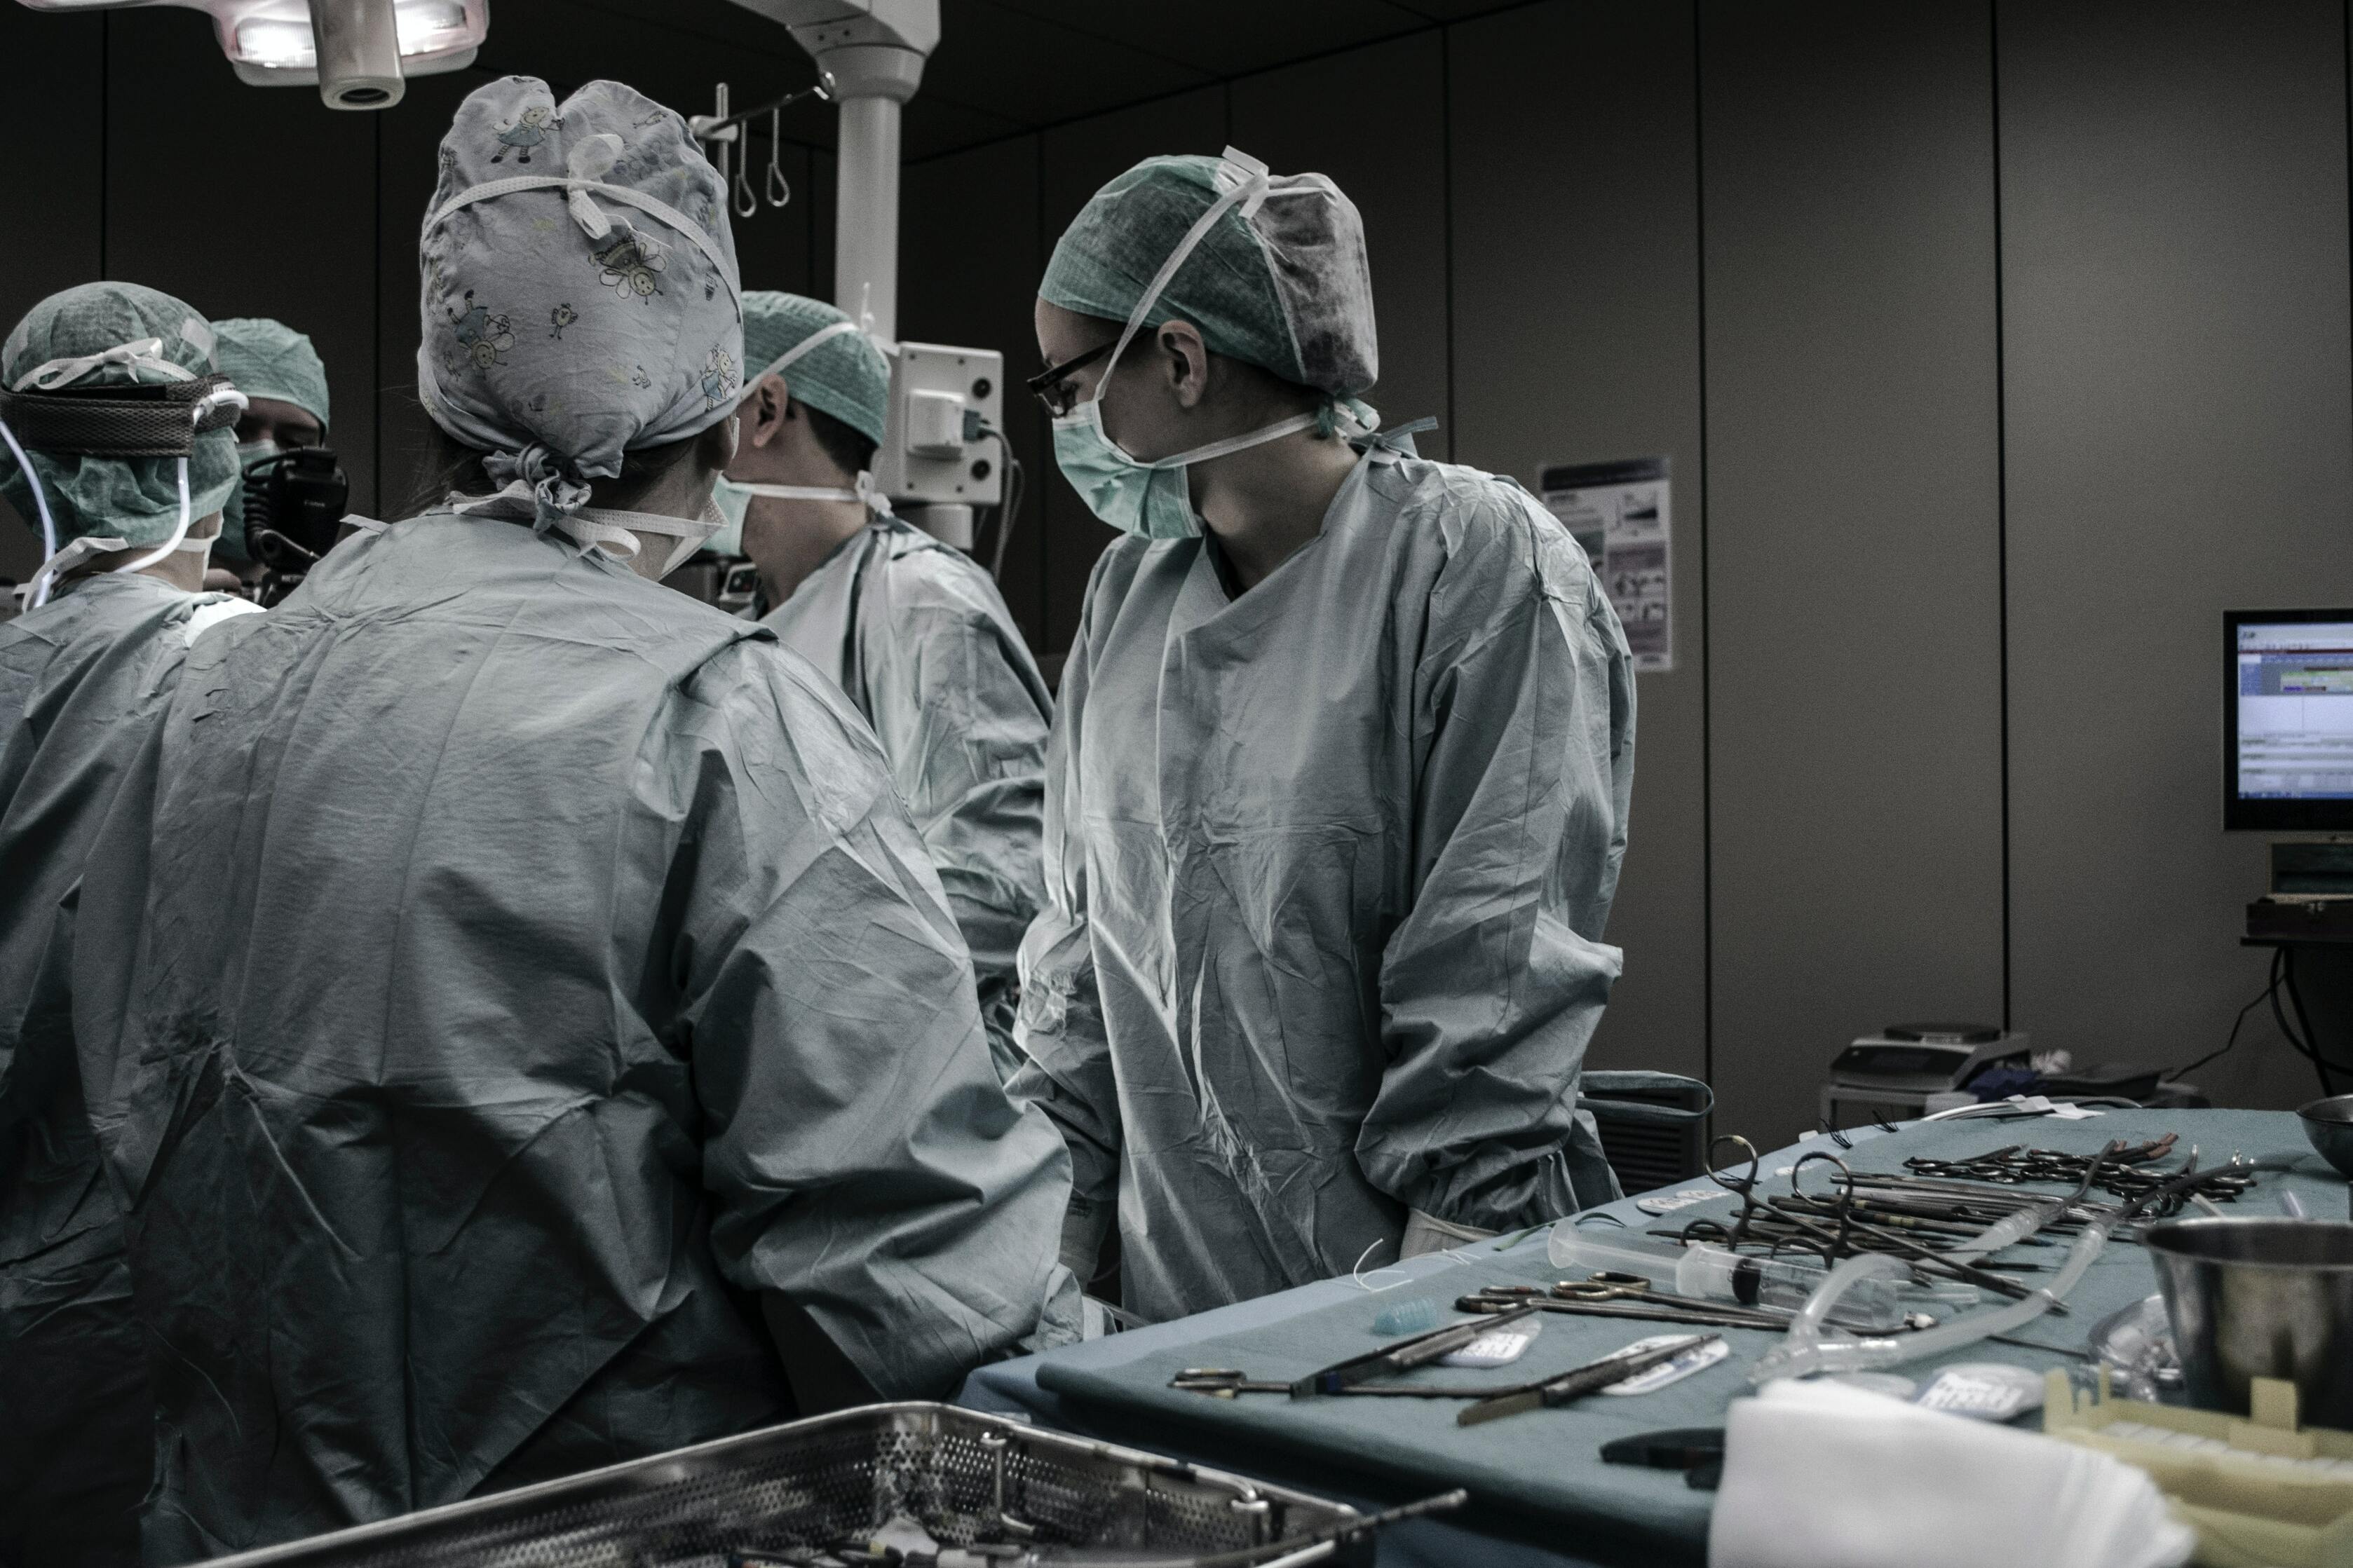 Doctors doing surgery in an operating room